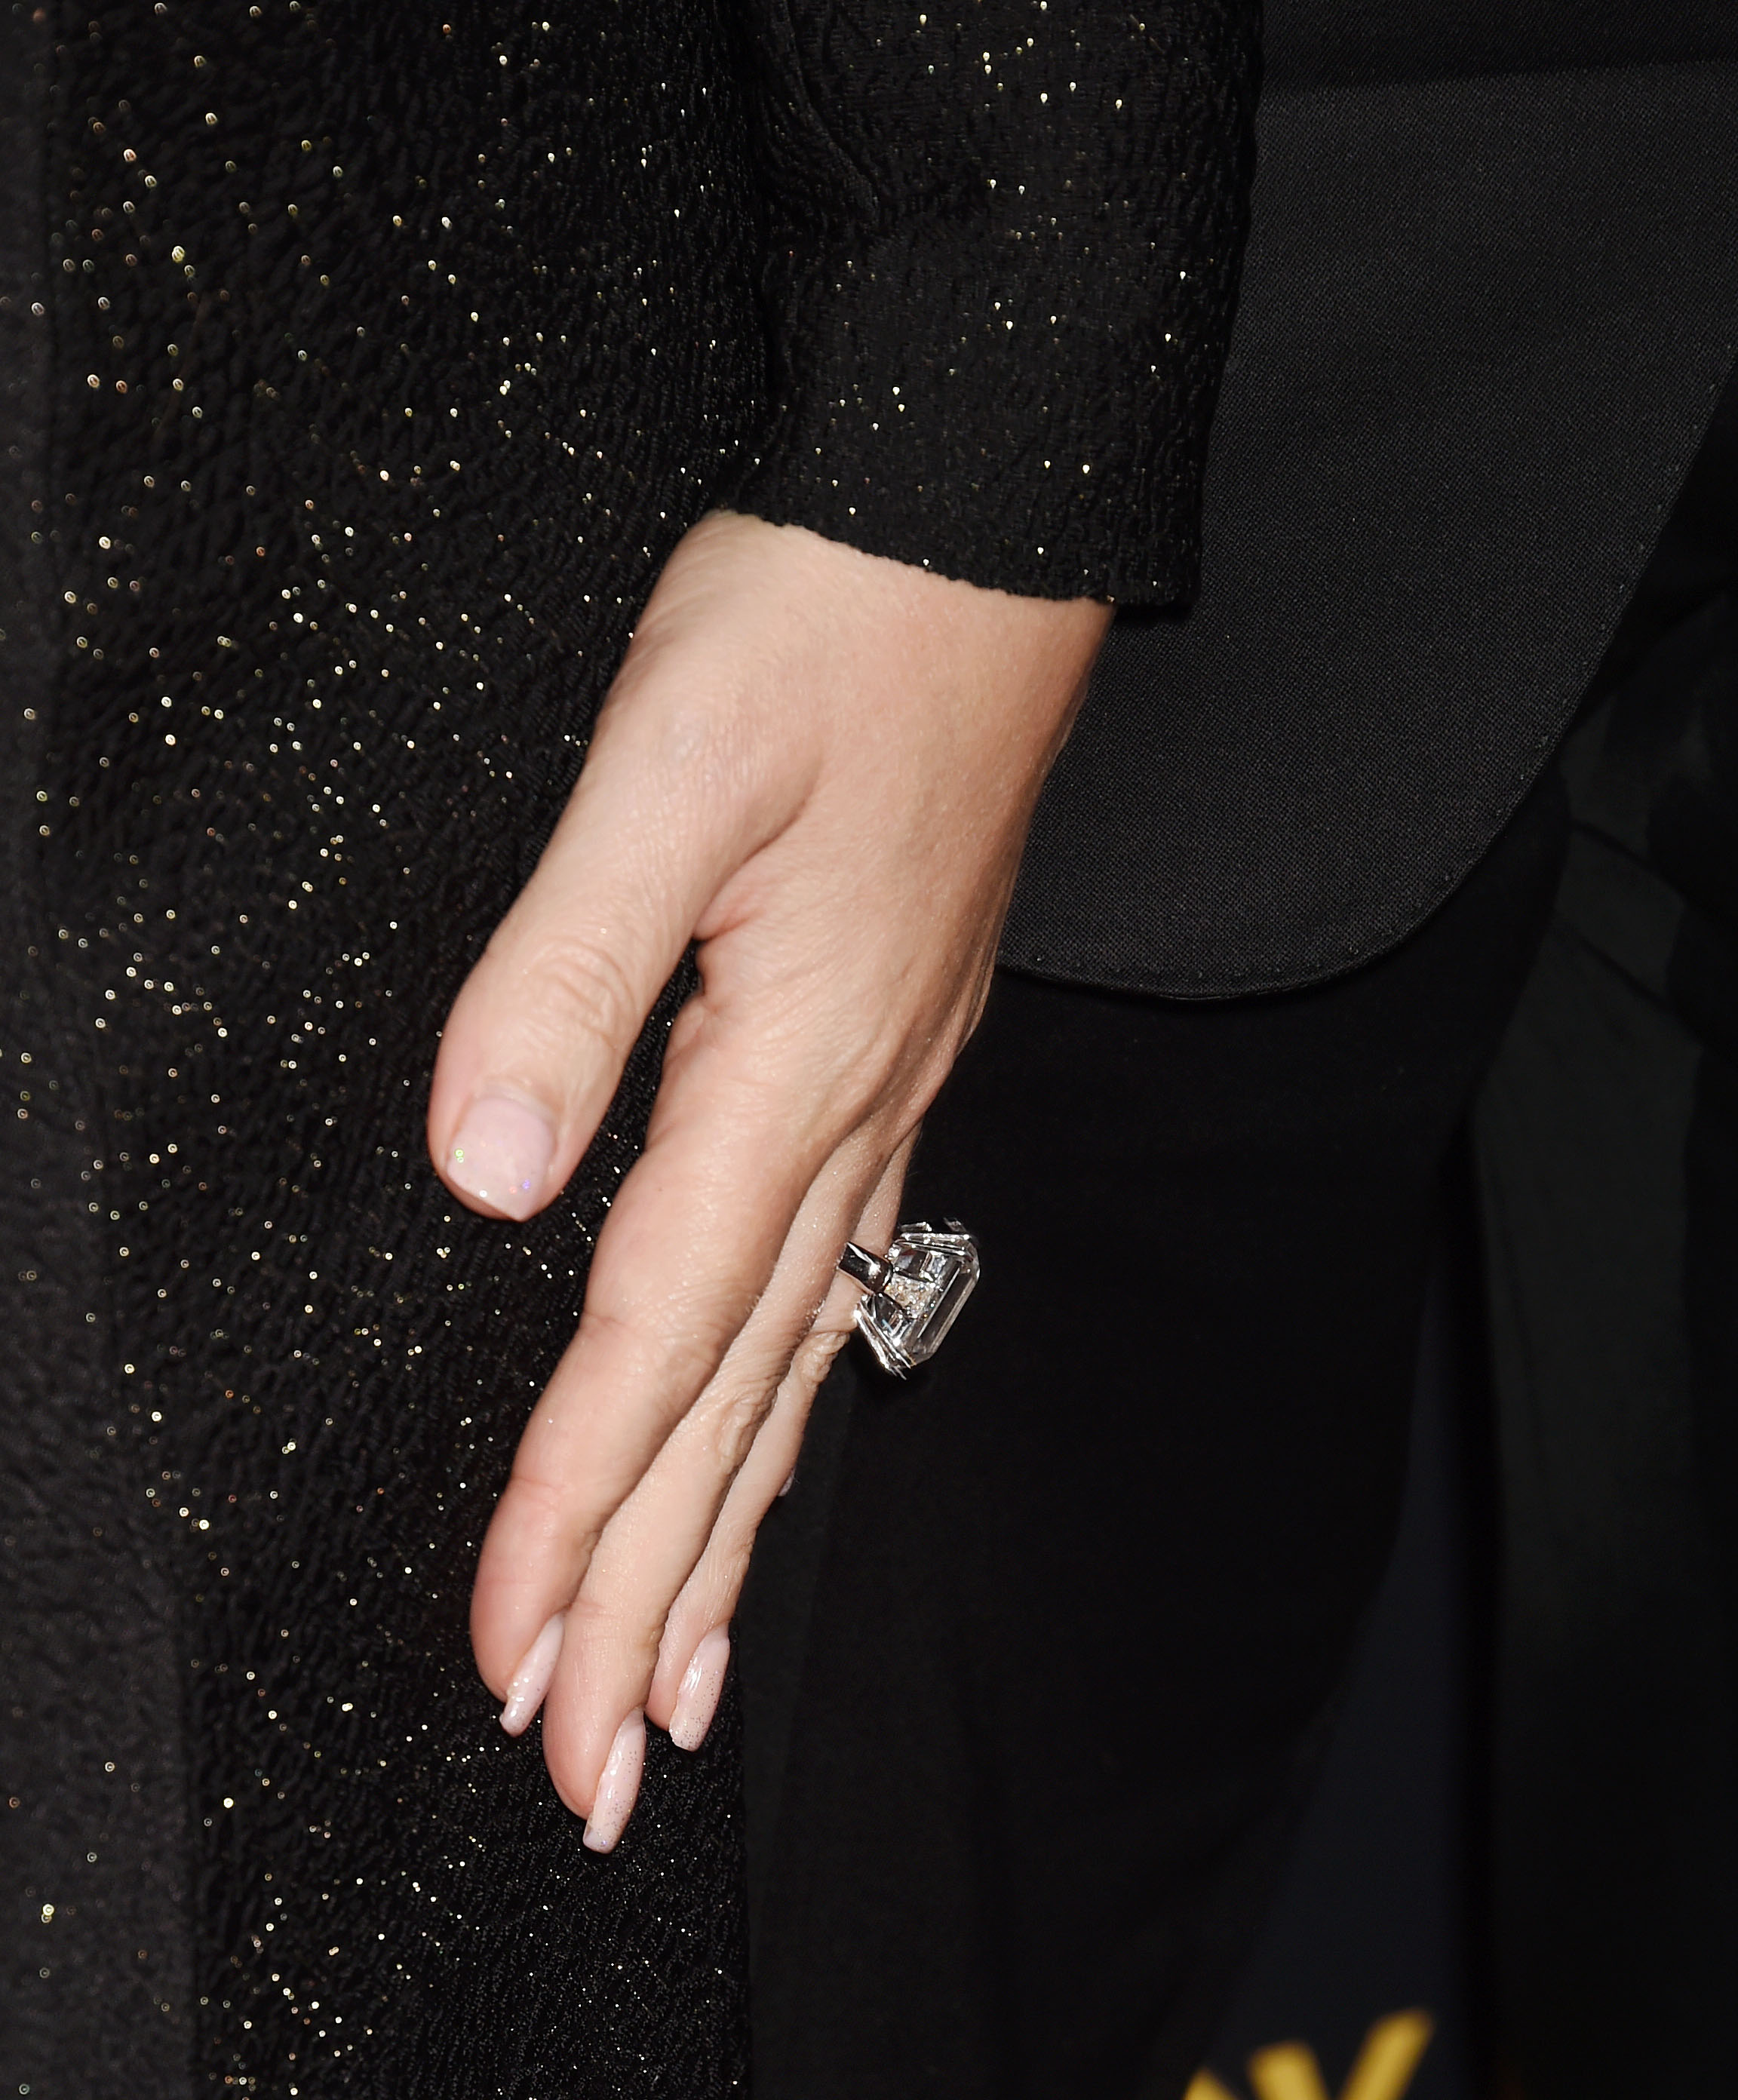 Mariah Carey Sold Her Engagement Ring for $2 Million